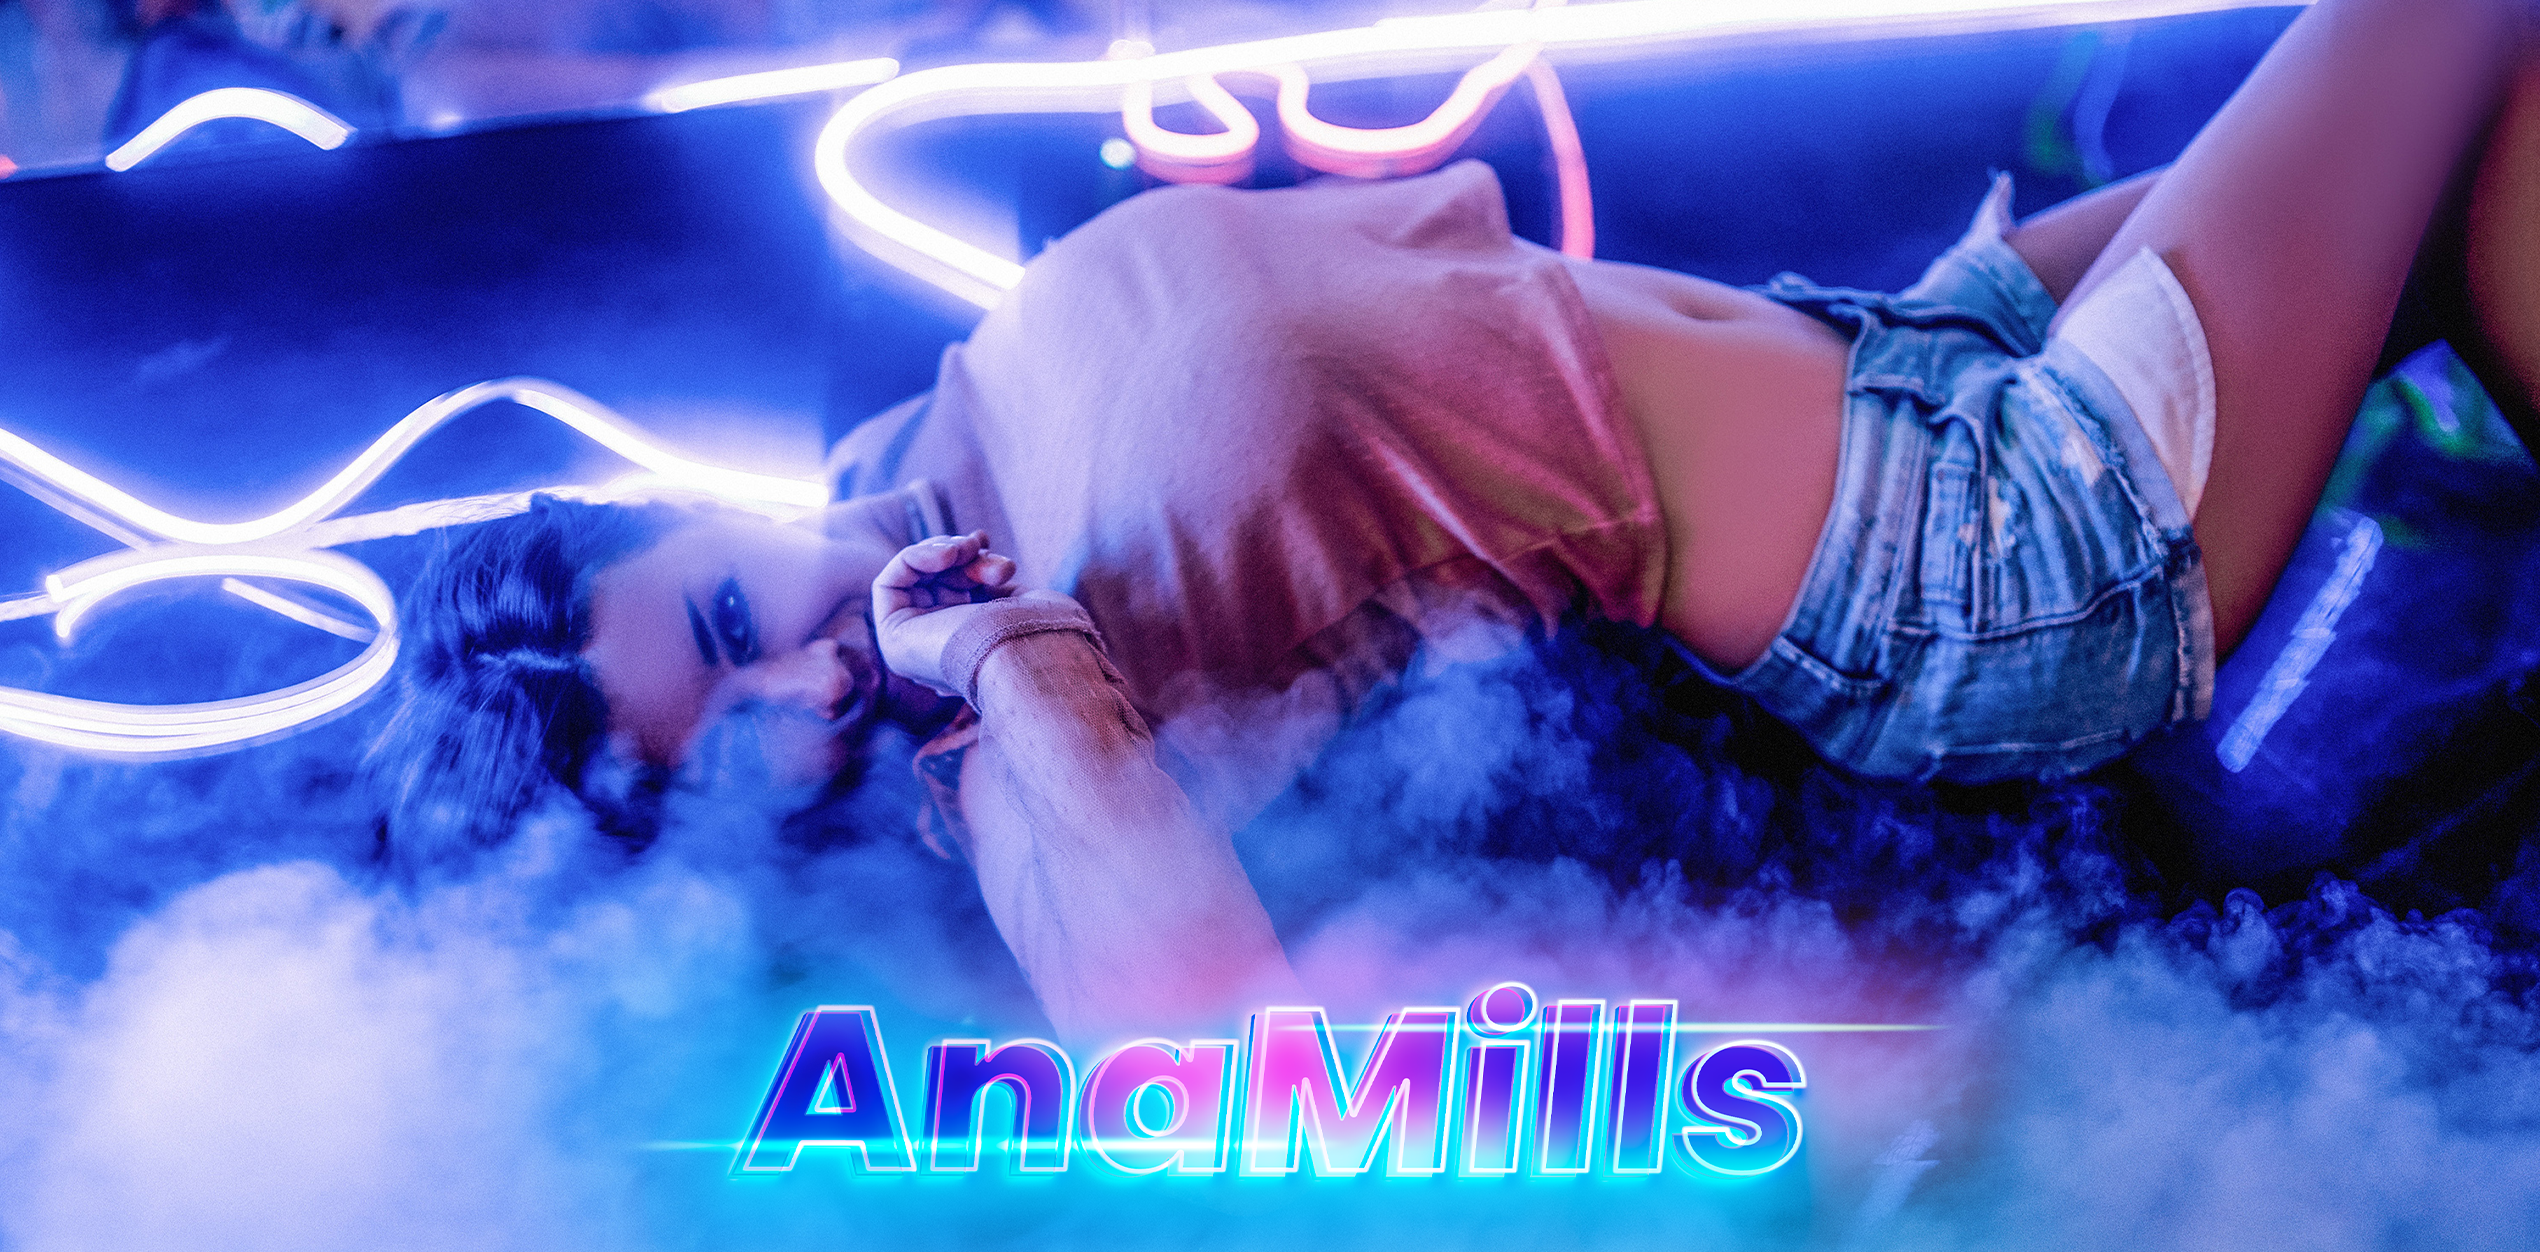 AnaMills Hey let's have some fun! welcome to my page! image: 1